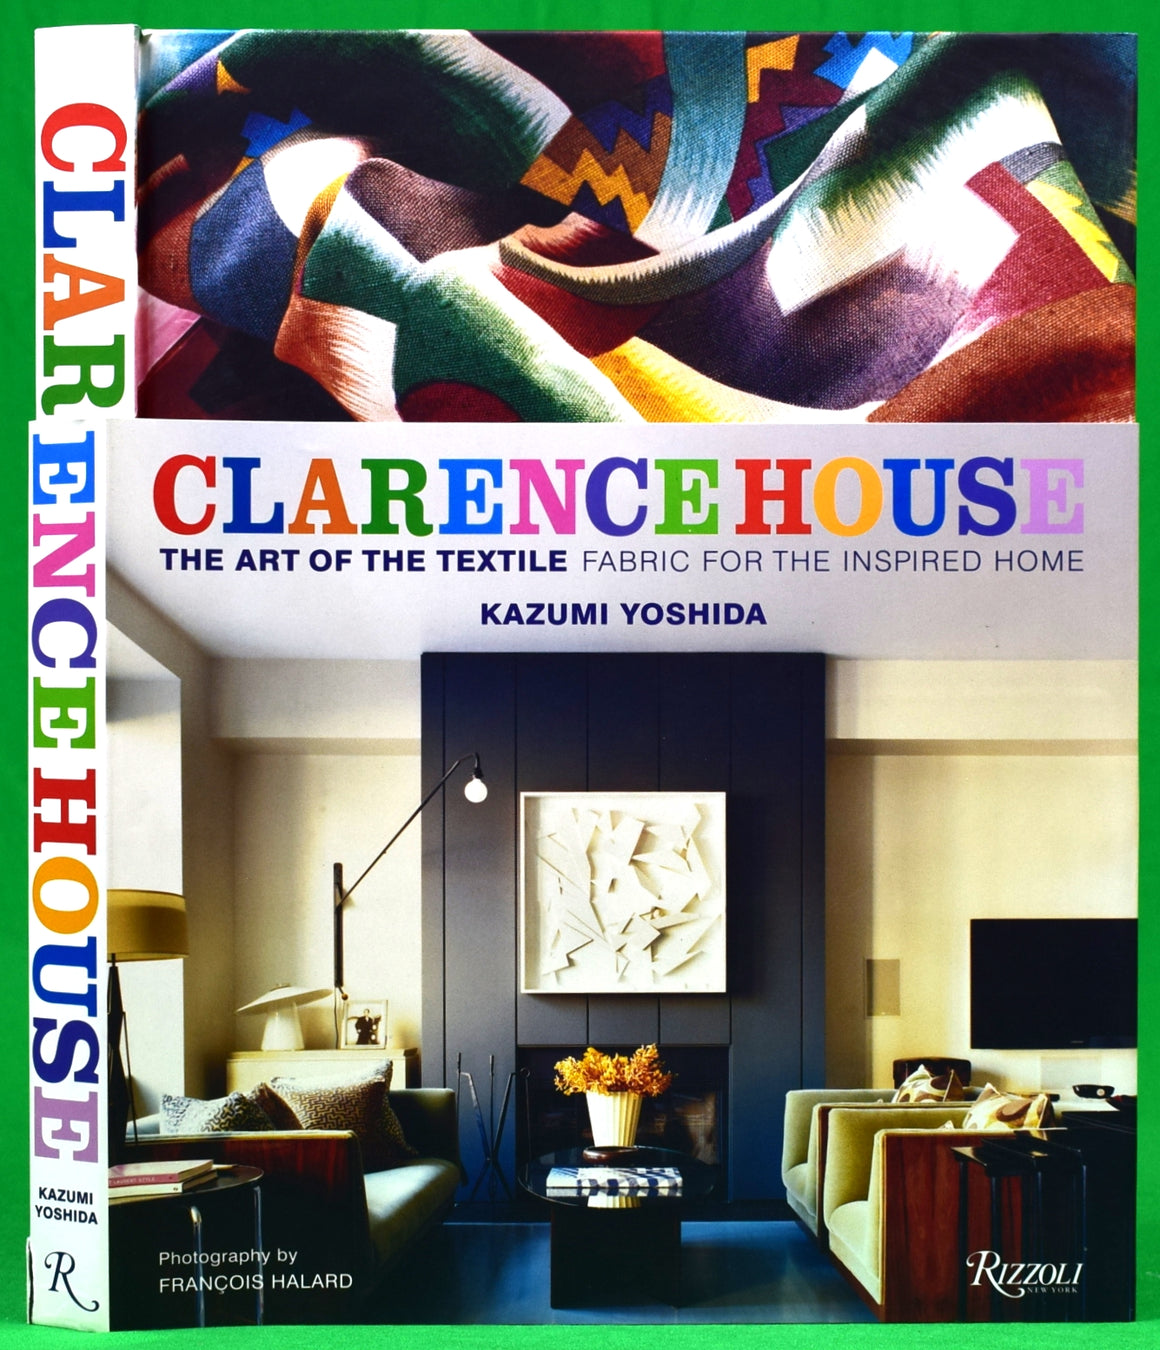 "Clarence House: The Art Of The Textile Fabric For The Inspired Home" 2011 YOSHIDA, Kazumi